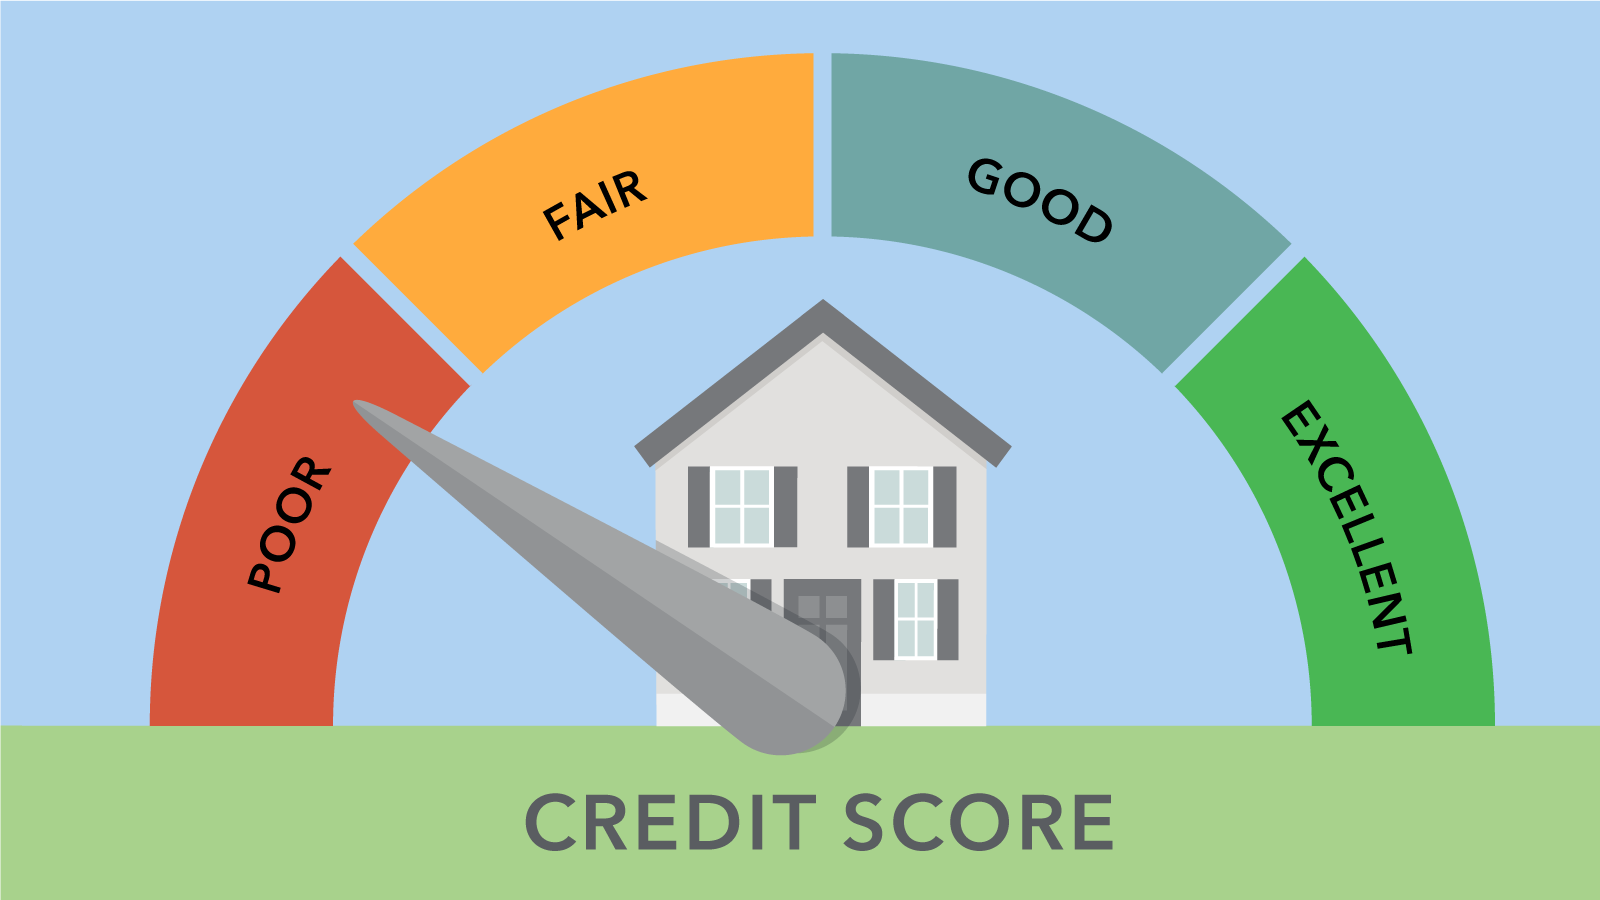 What Are The Important Things To Know About A Bad Credit Score